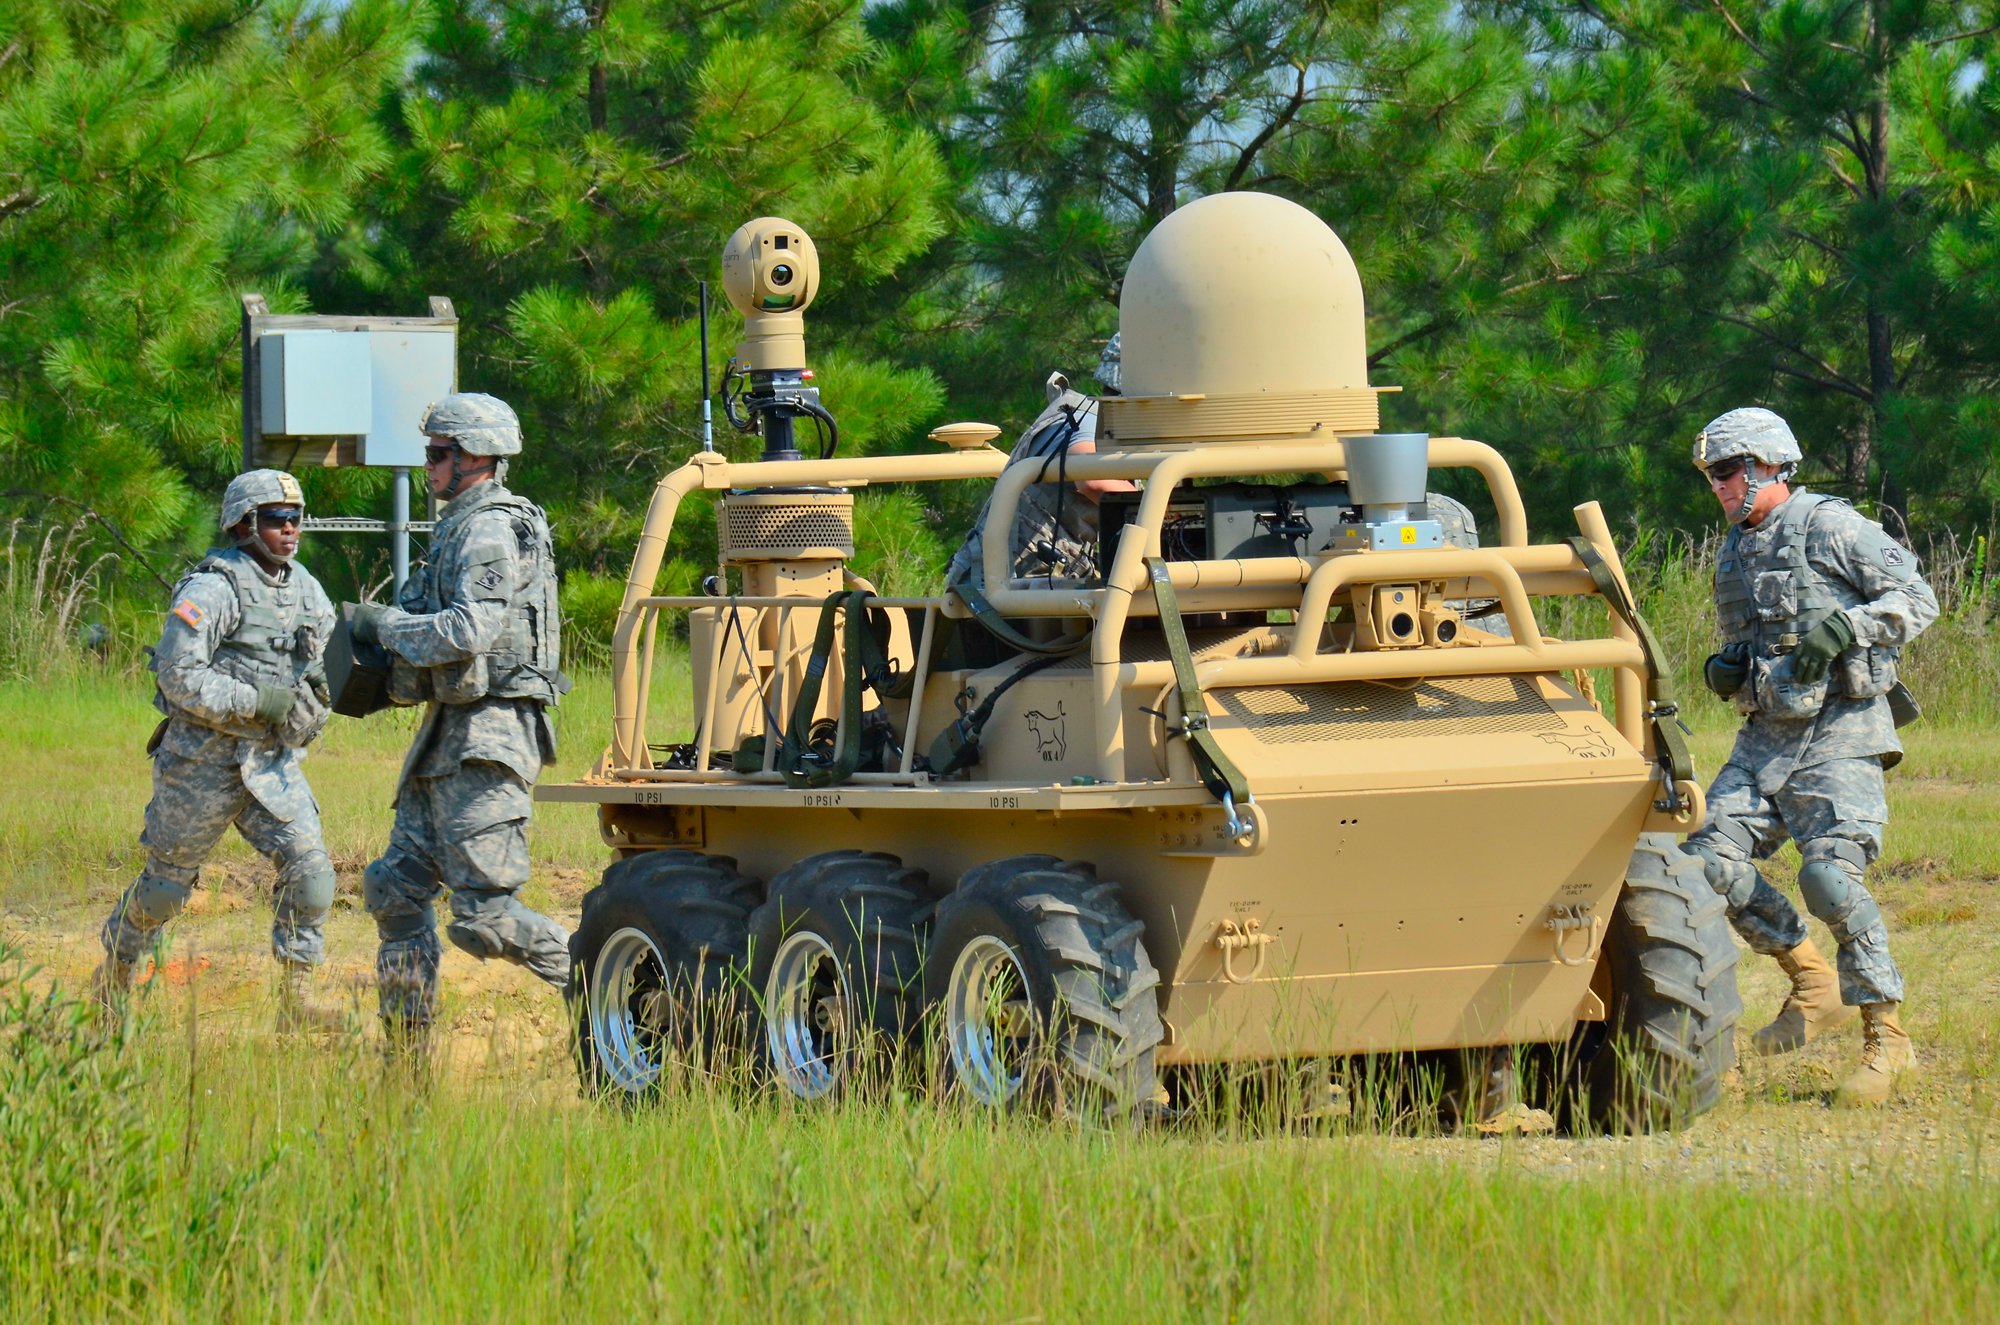 Army Robotics In The Military